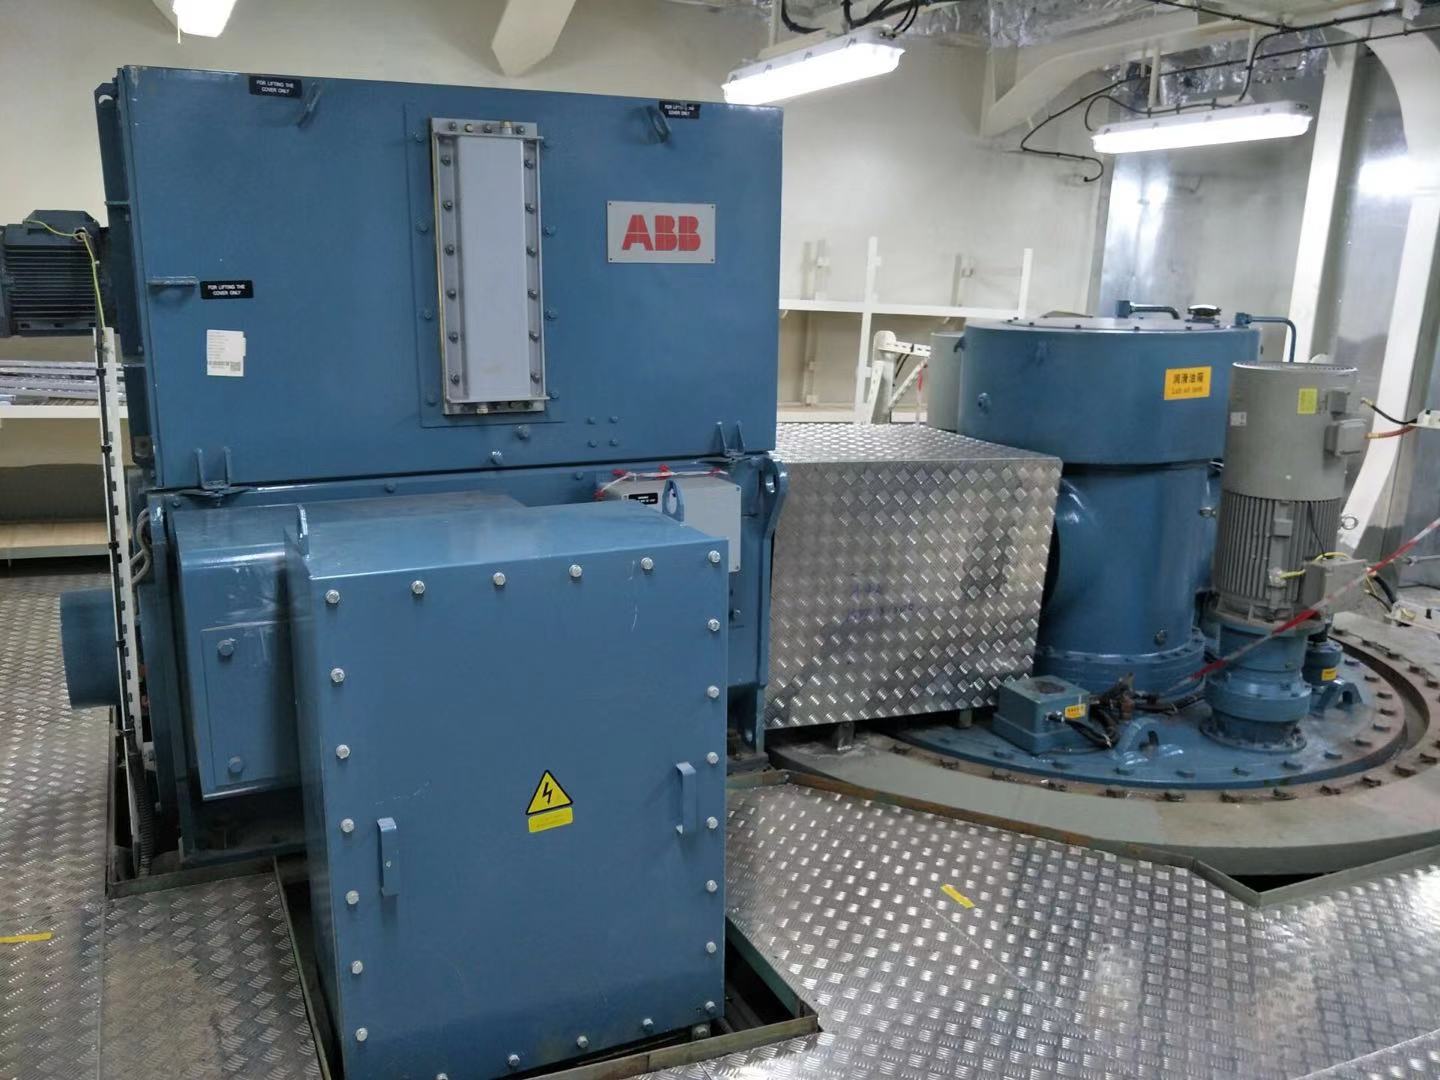 ABB motors and generators are favored by many industries such as ships ports power petrochemical water food and beverage